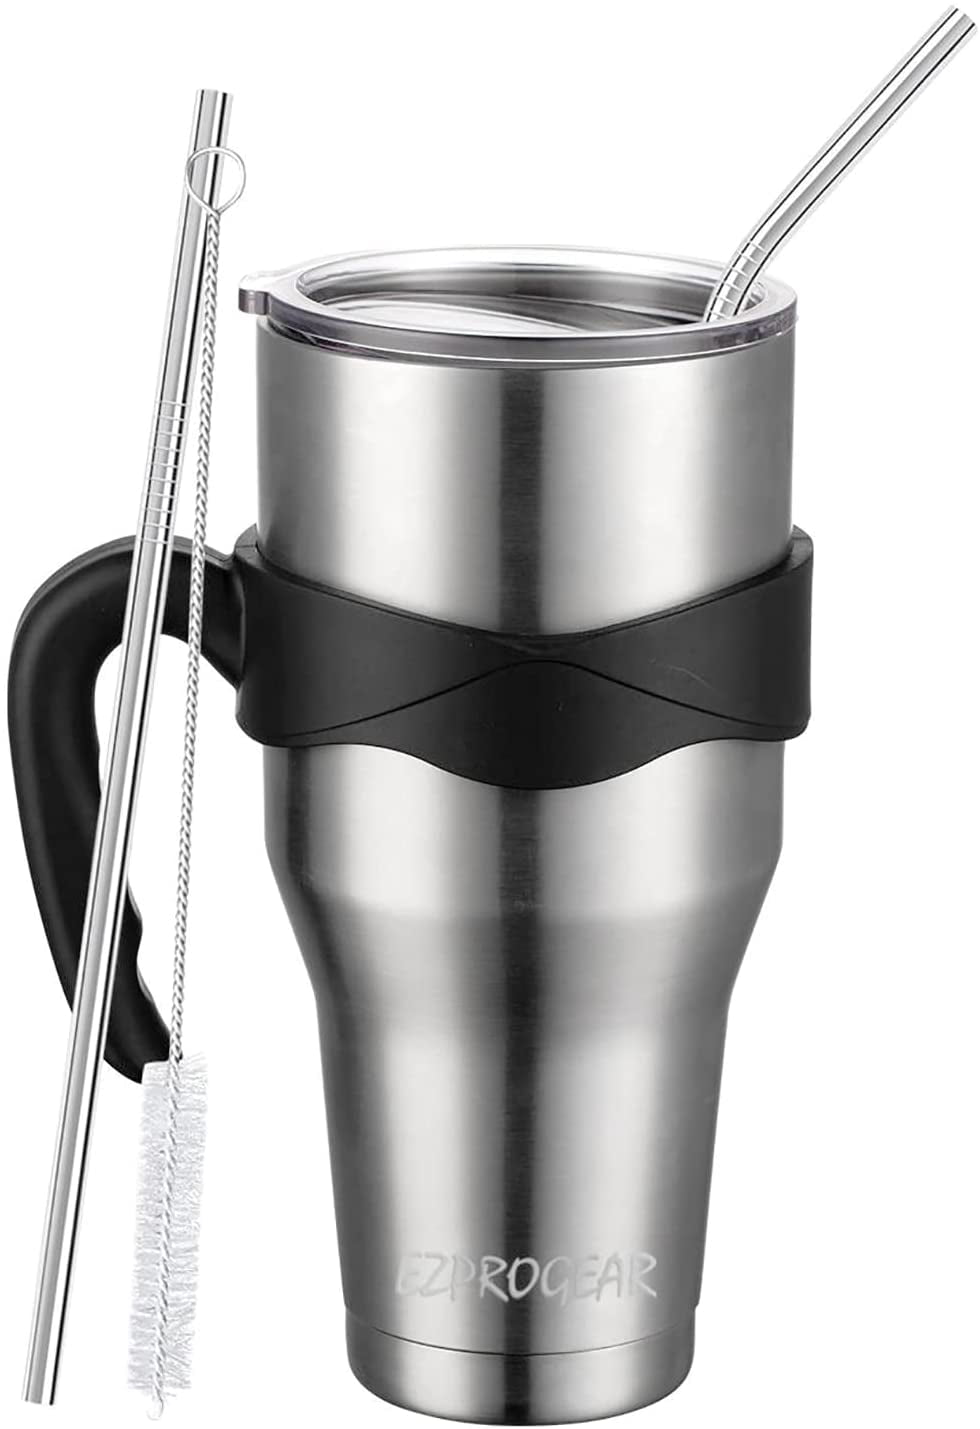 40 oz stainless steel insulated cup with lid and straw, insulated travel  cup with handle, dual wall …See more 40 oz stainless steel insulated cup  with